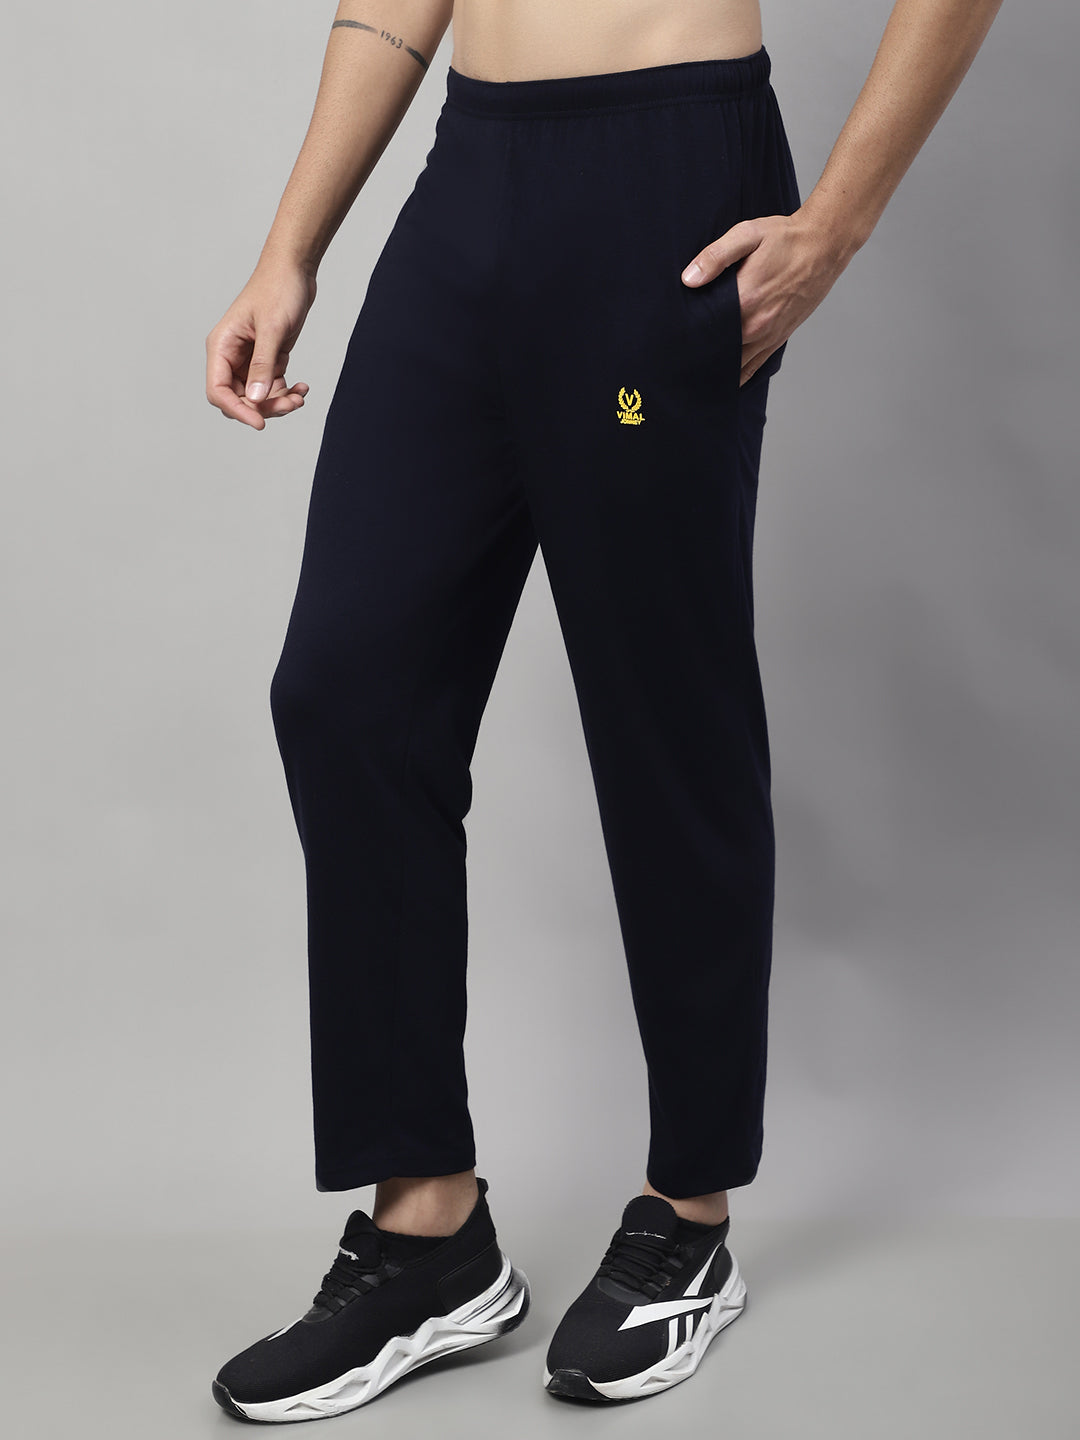 Cotton On Men's Cargo Loose Fit Track Pants | CoolSprings Galleria